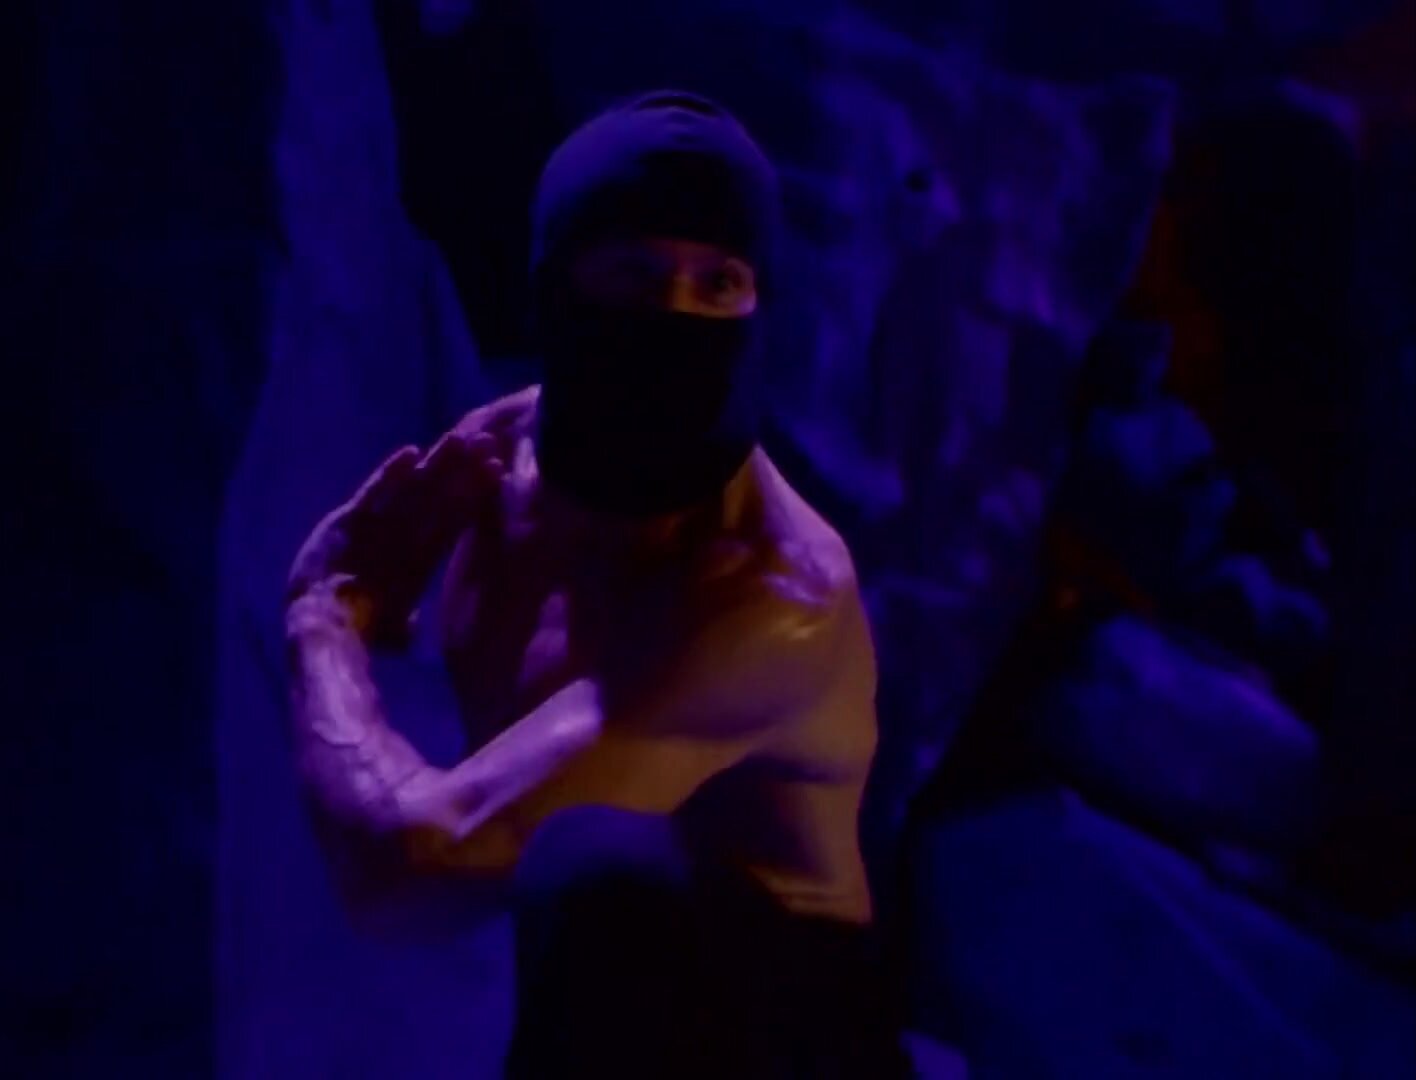 shirtless masked sentry fight and defeated